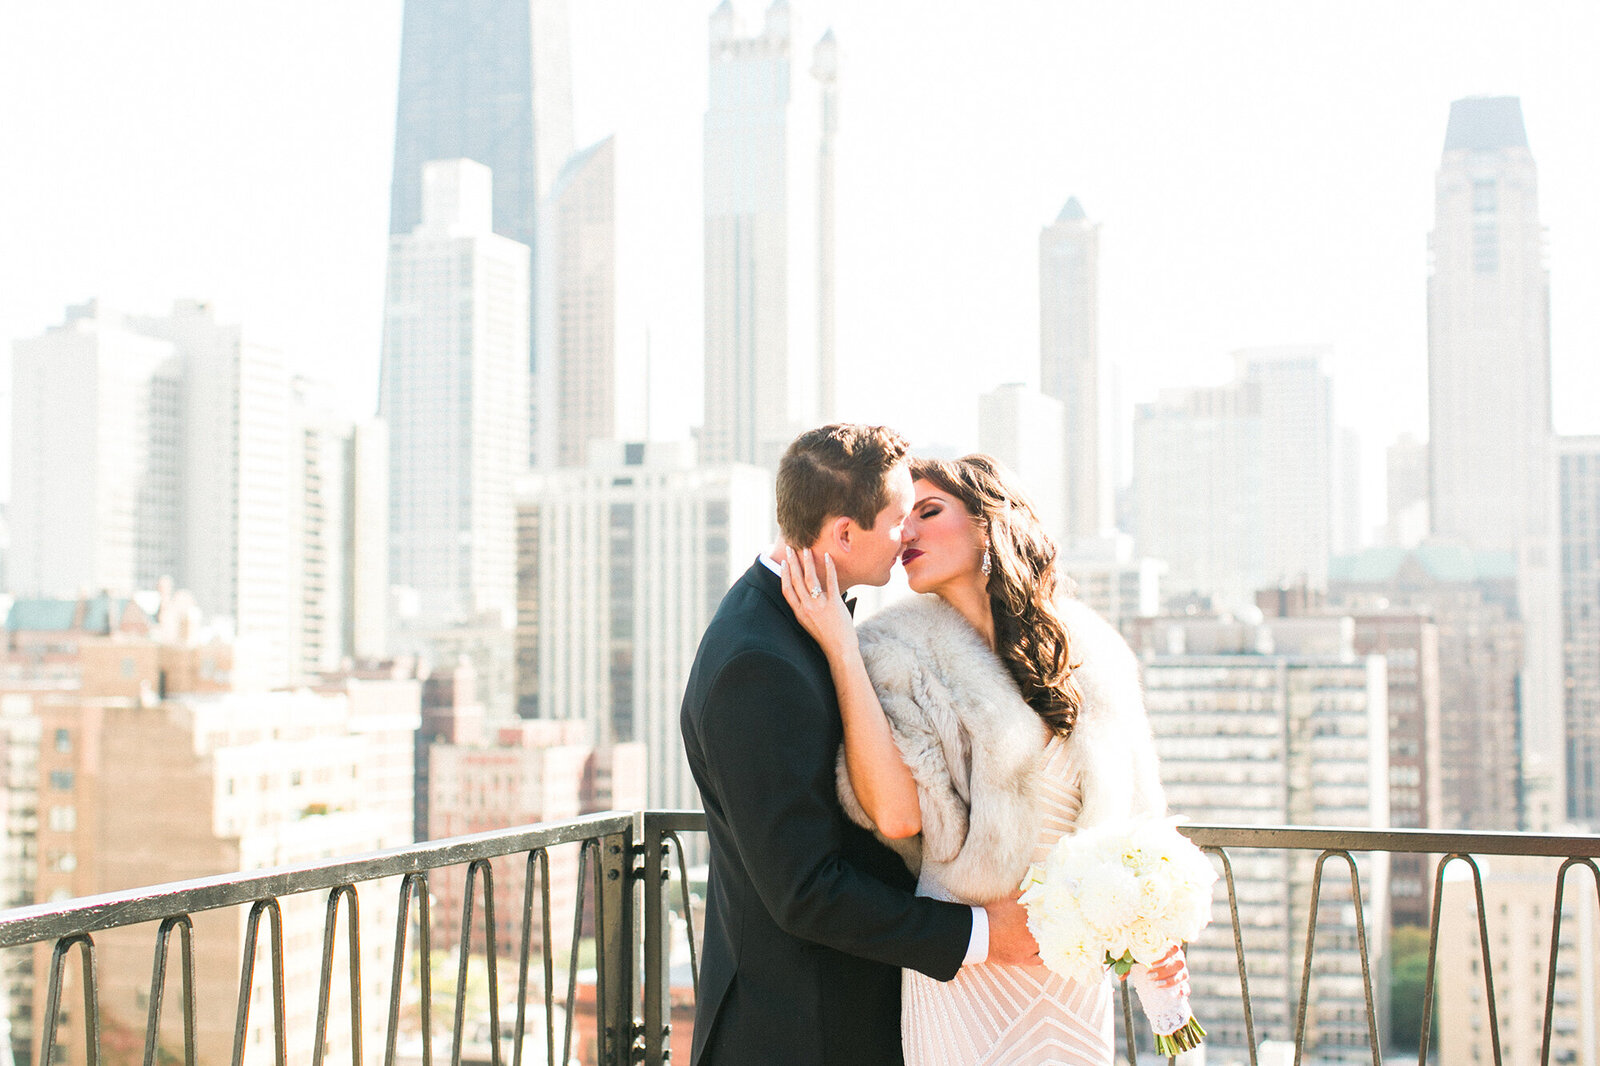 A romantic wedding day portrait on a rooftop with the city skyline of Chicago behind them.